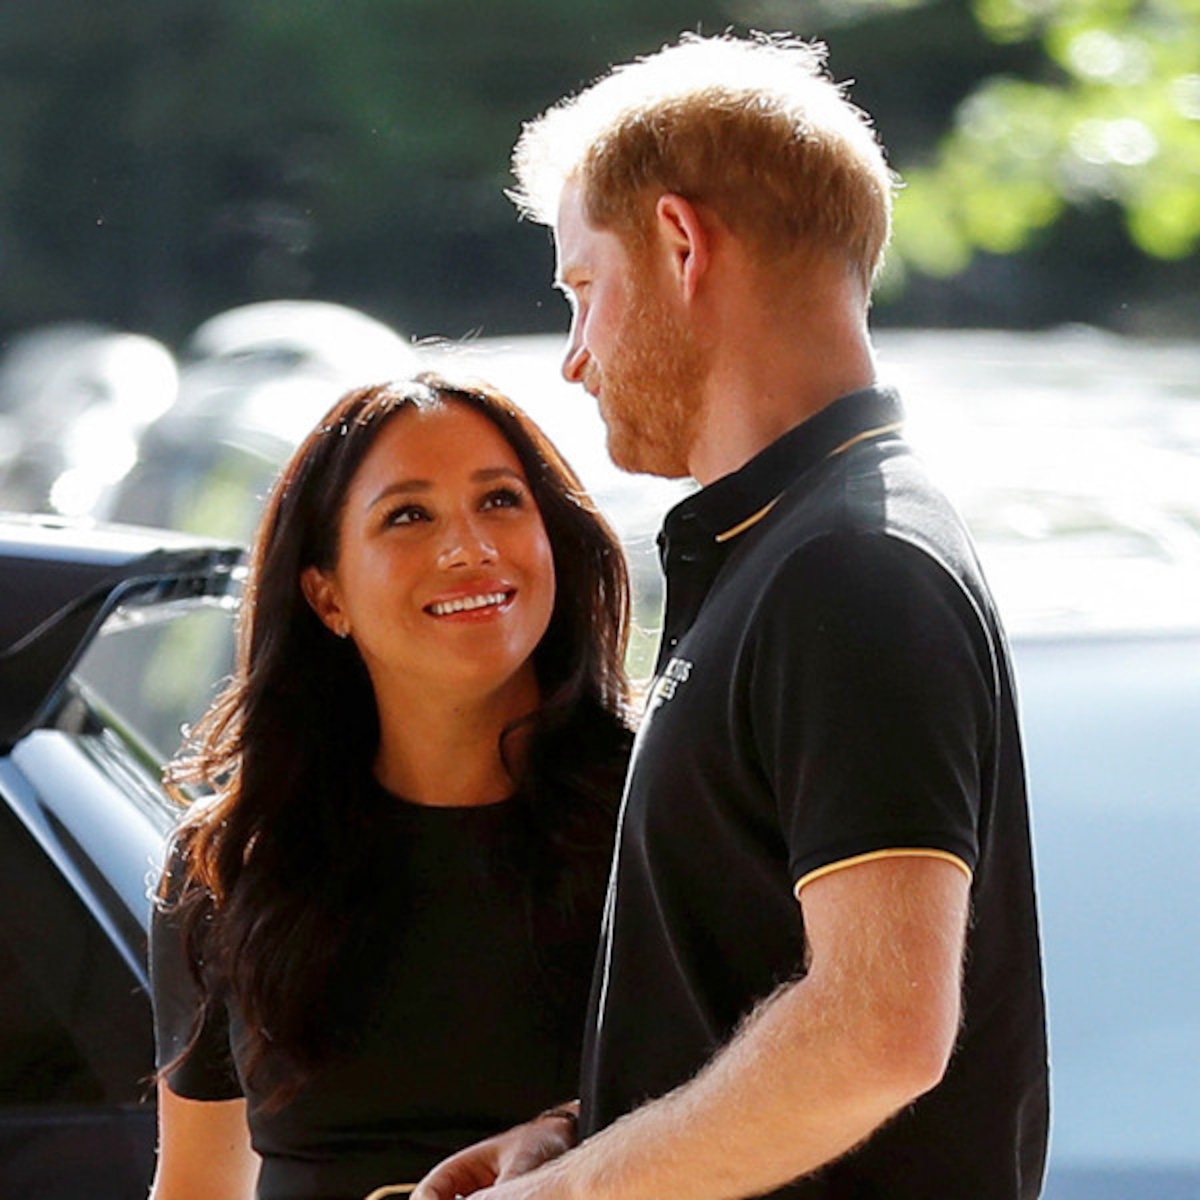 broadcast Bull Rarely Meghan Markle Makes Surprise Appearance at Baseball Game With Harry - E!  Online